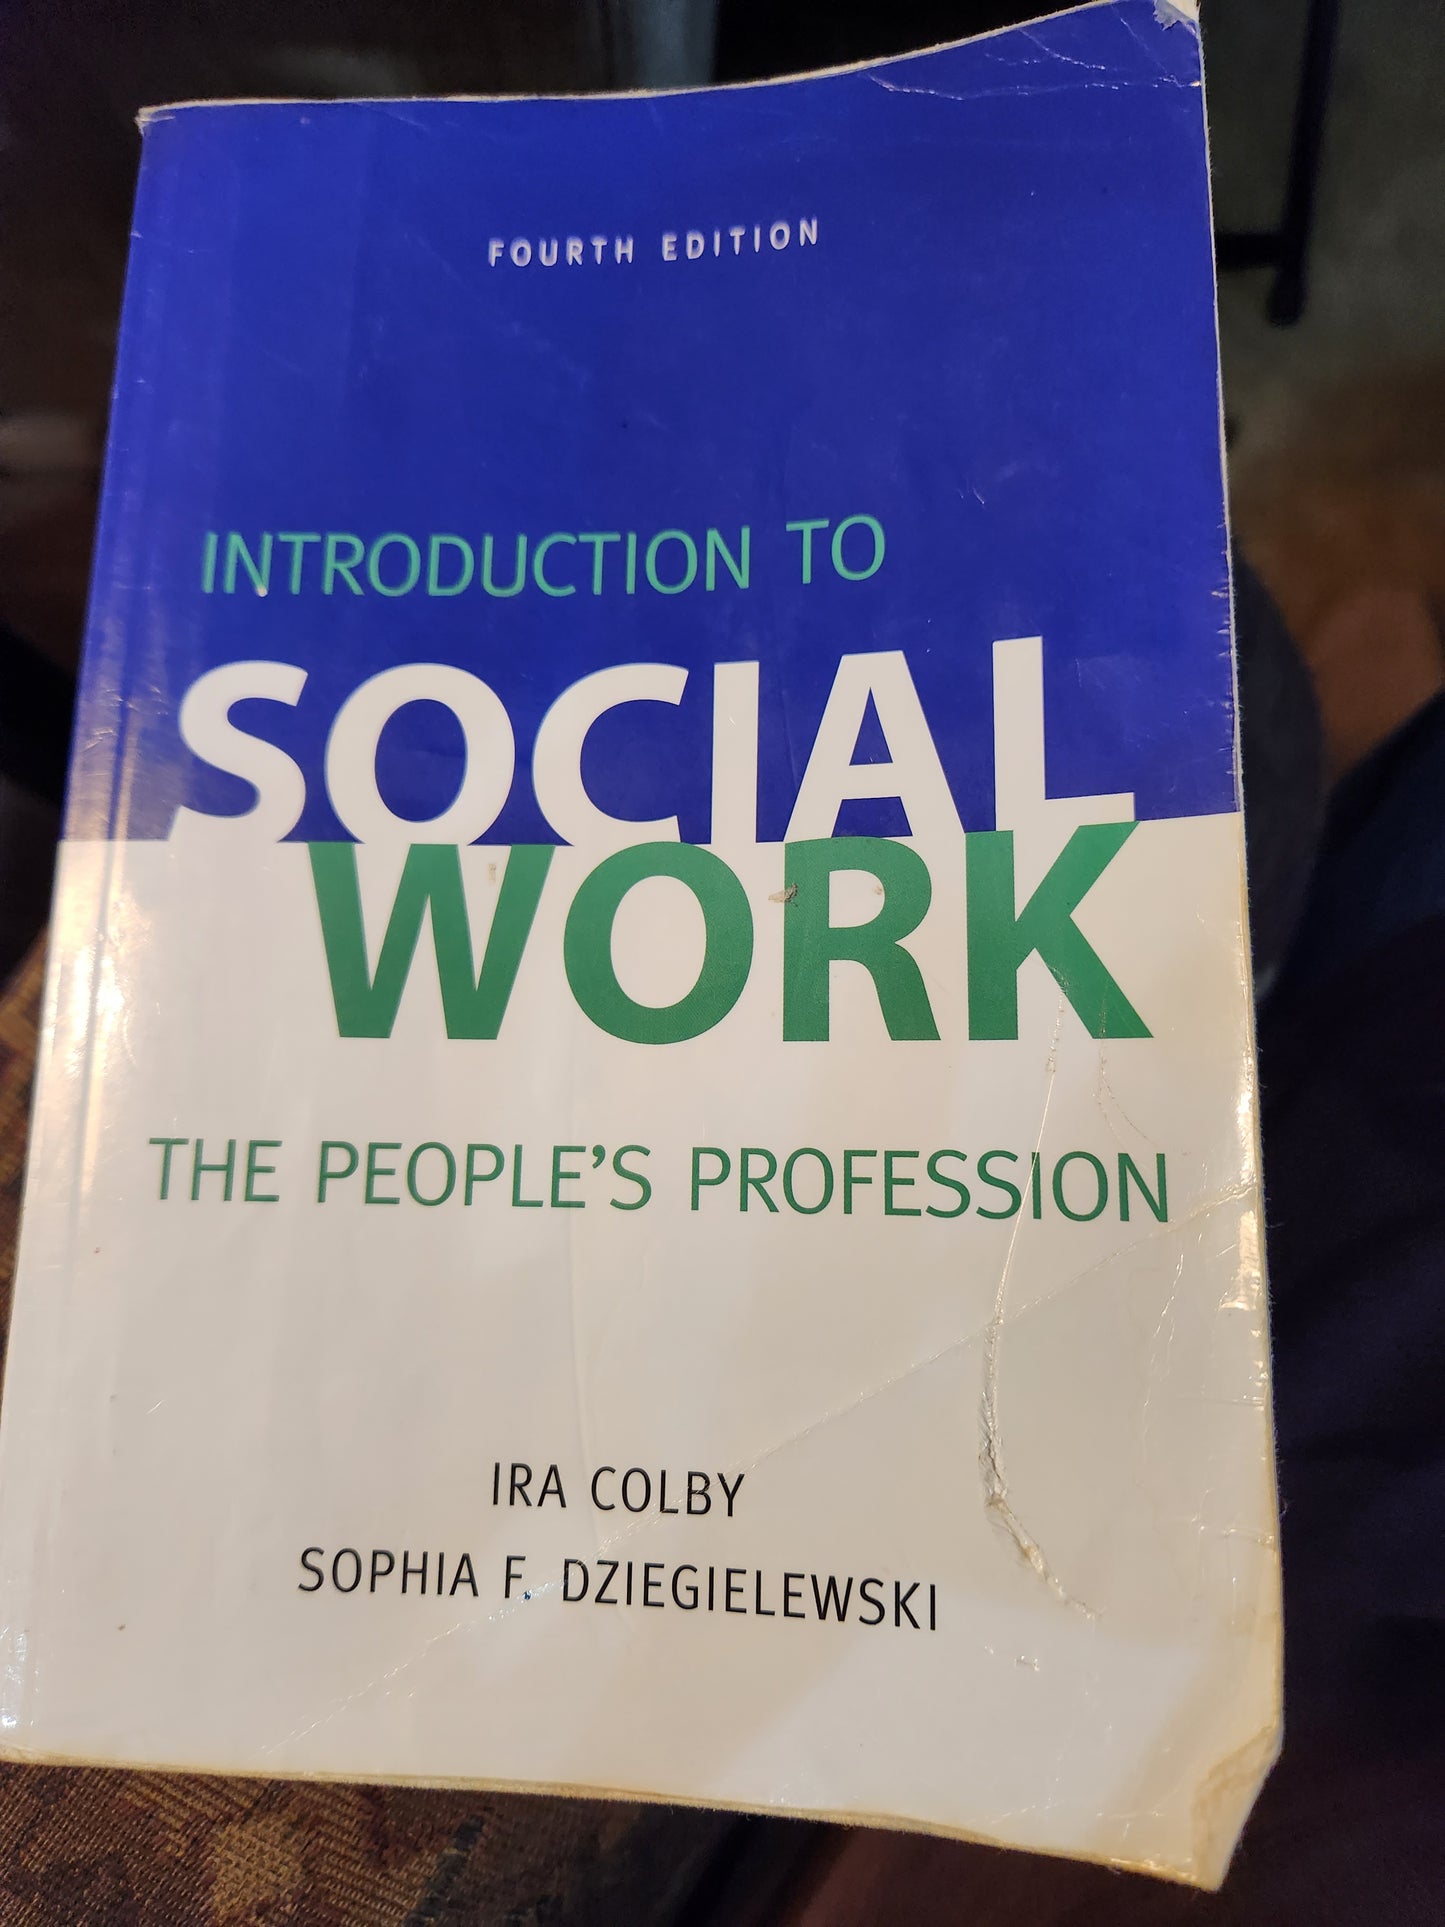 Introduction to Social Work, Fourth Edition : The People's Profession by Sophia